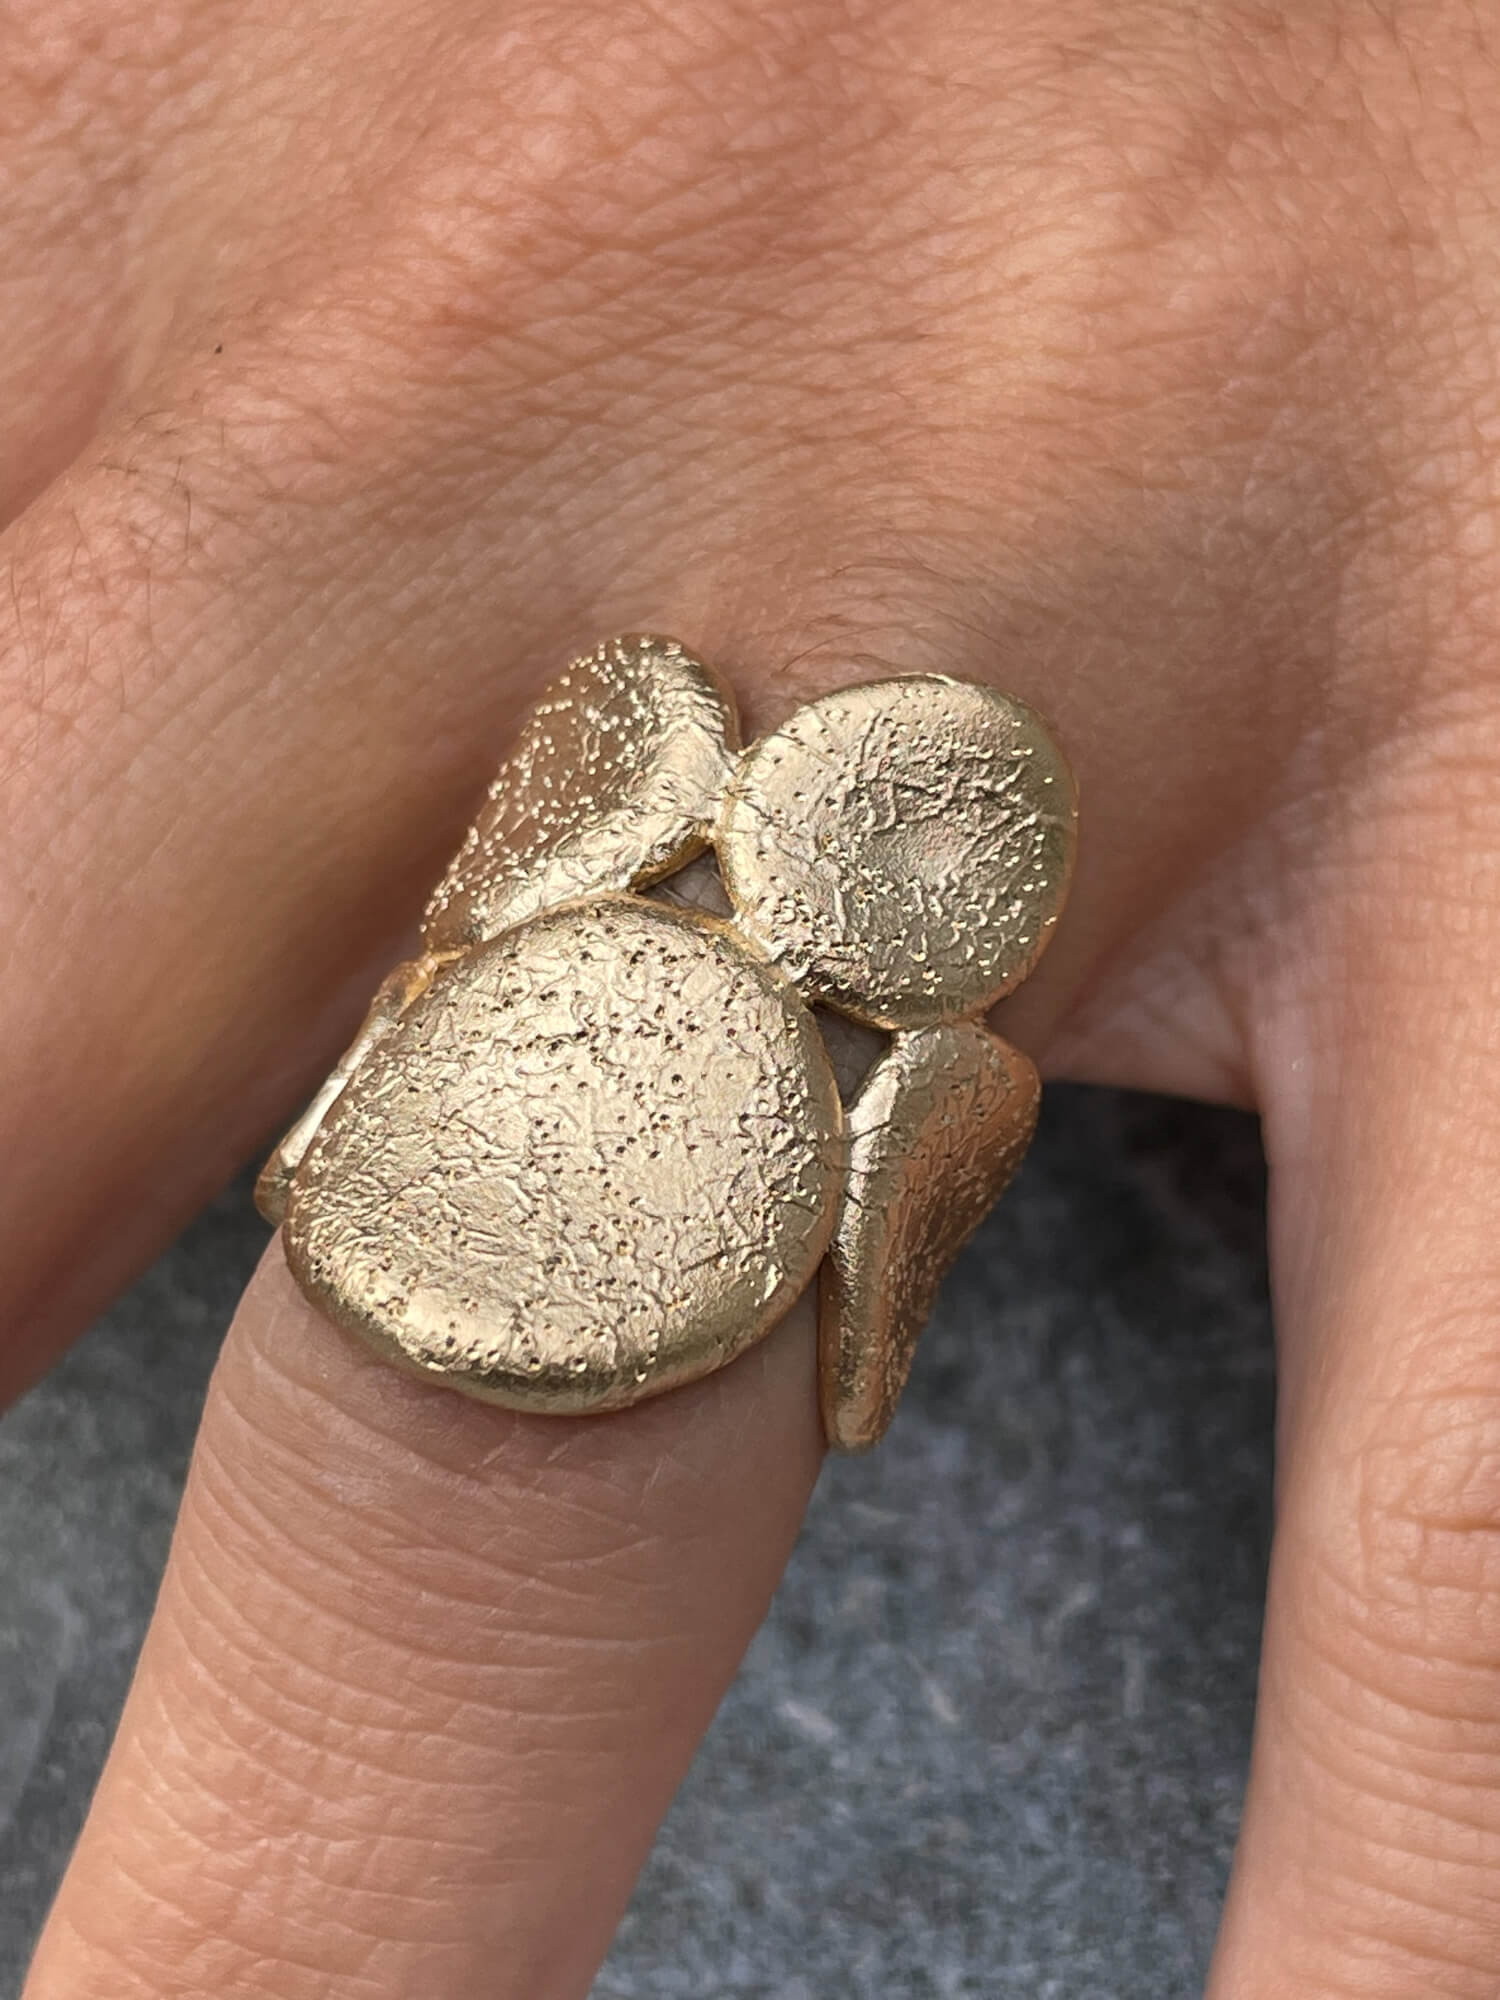 Gilt ring with oval-shaped operations